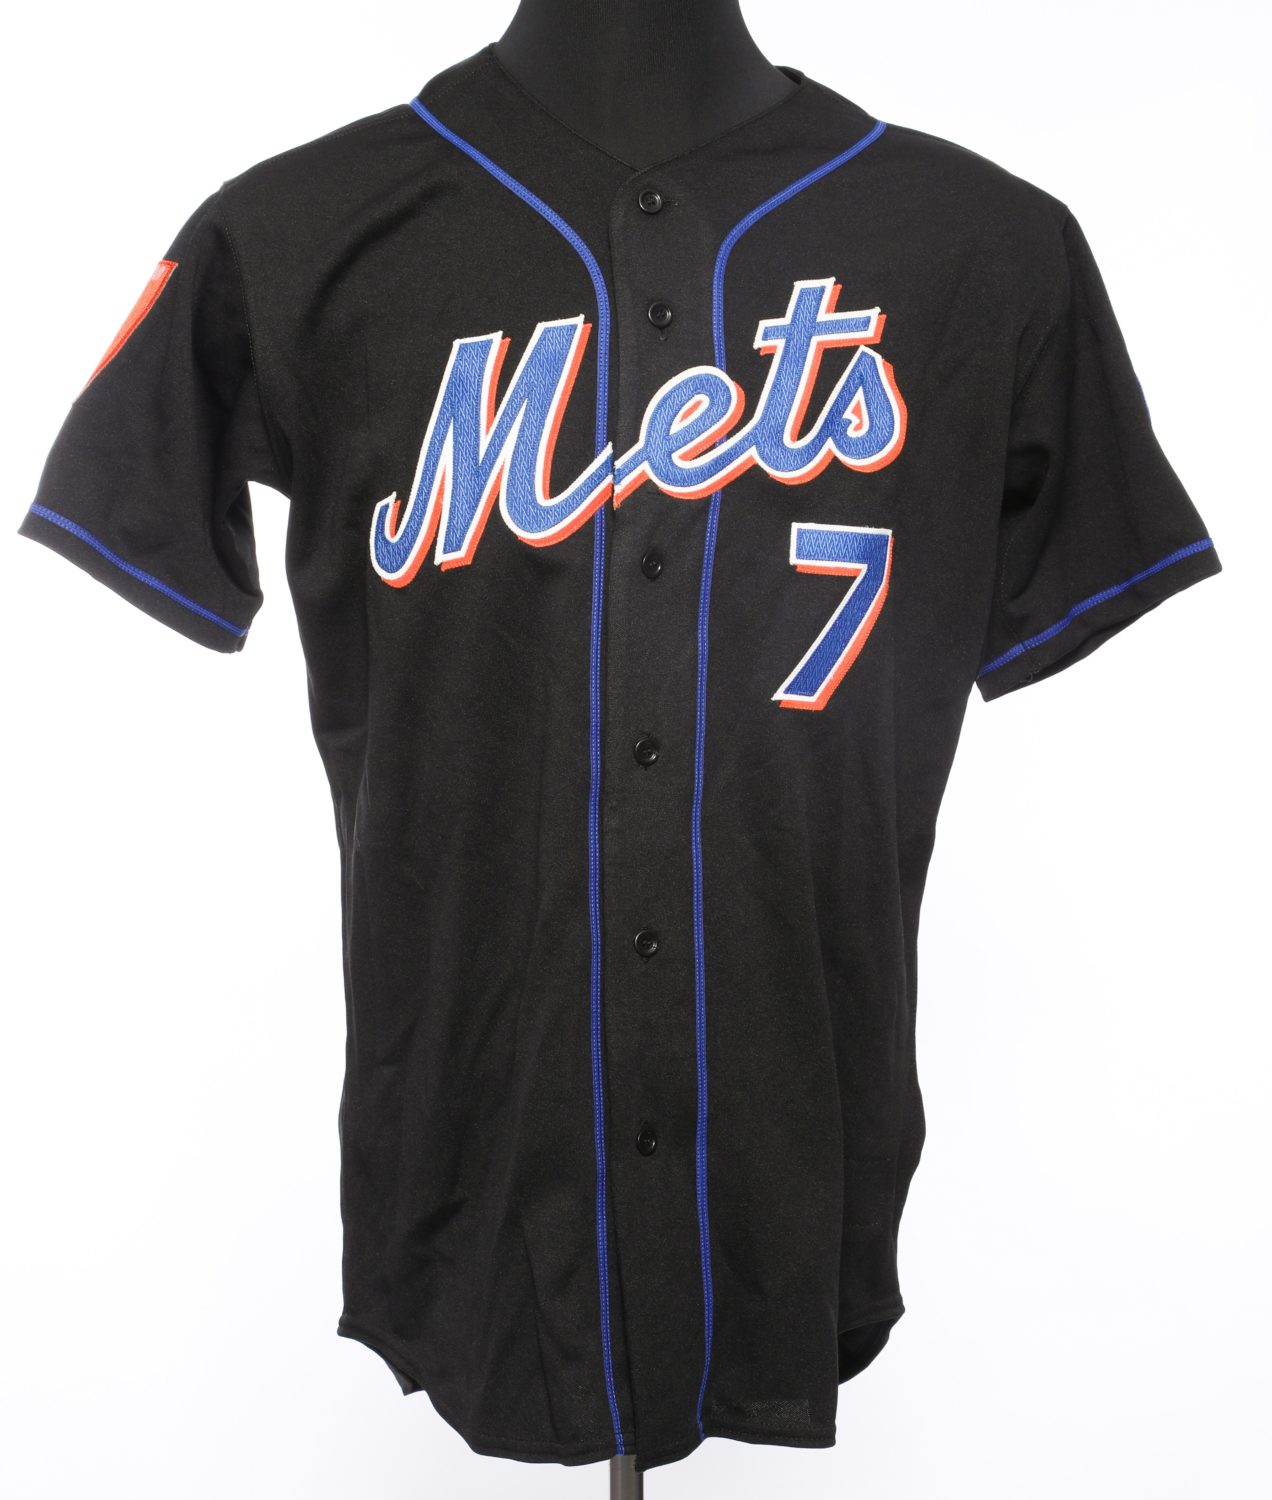 Jose Reyes Autographed 2004 Road Jersey